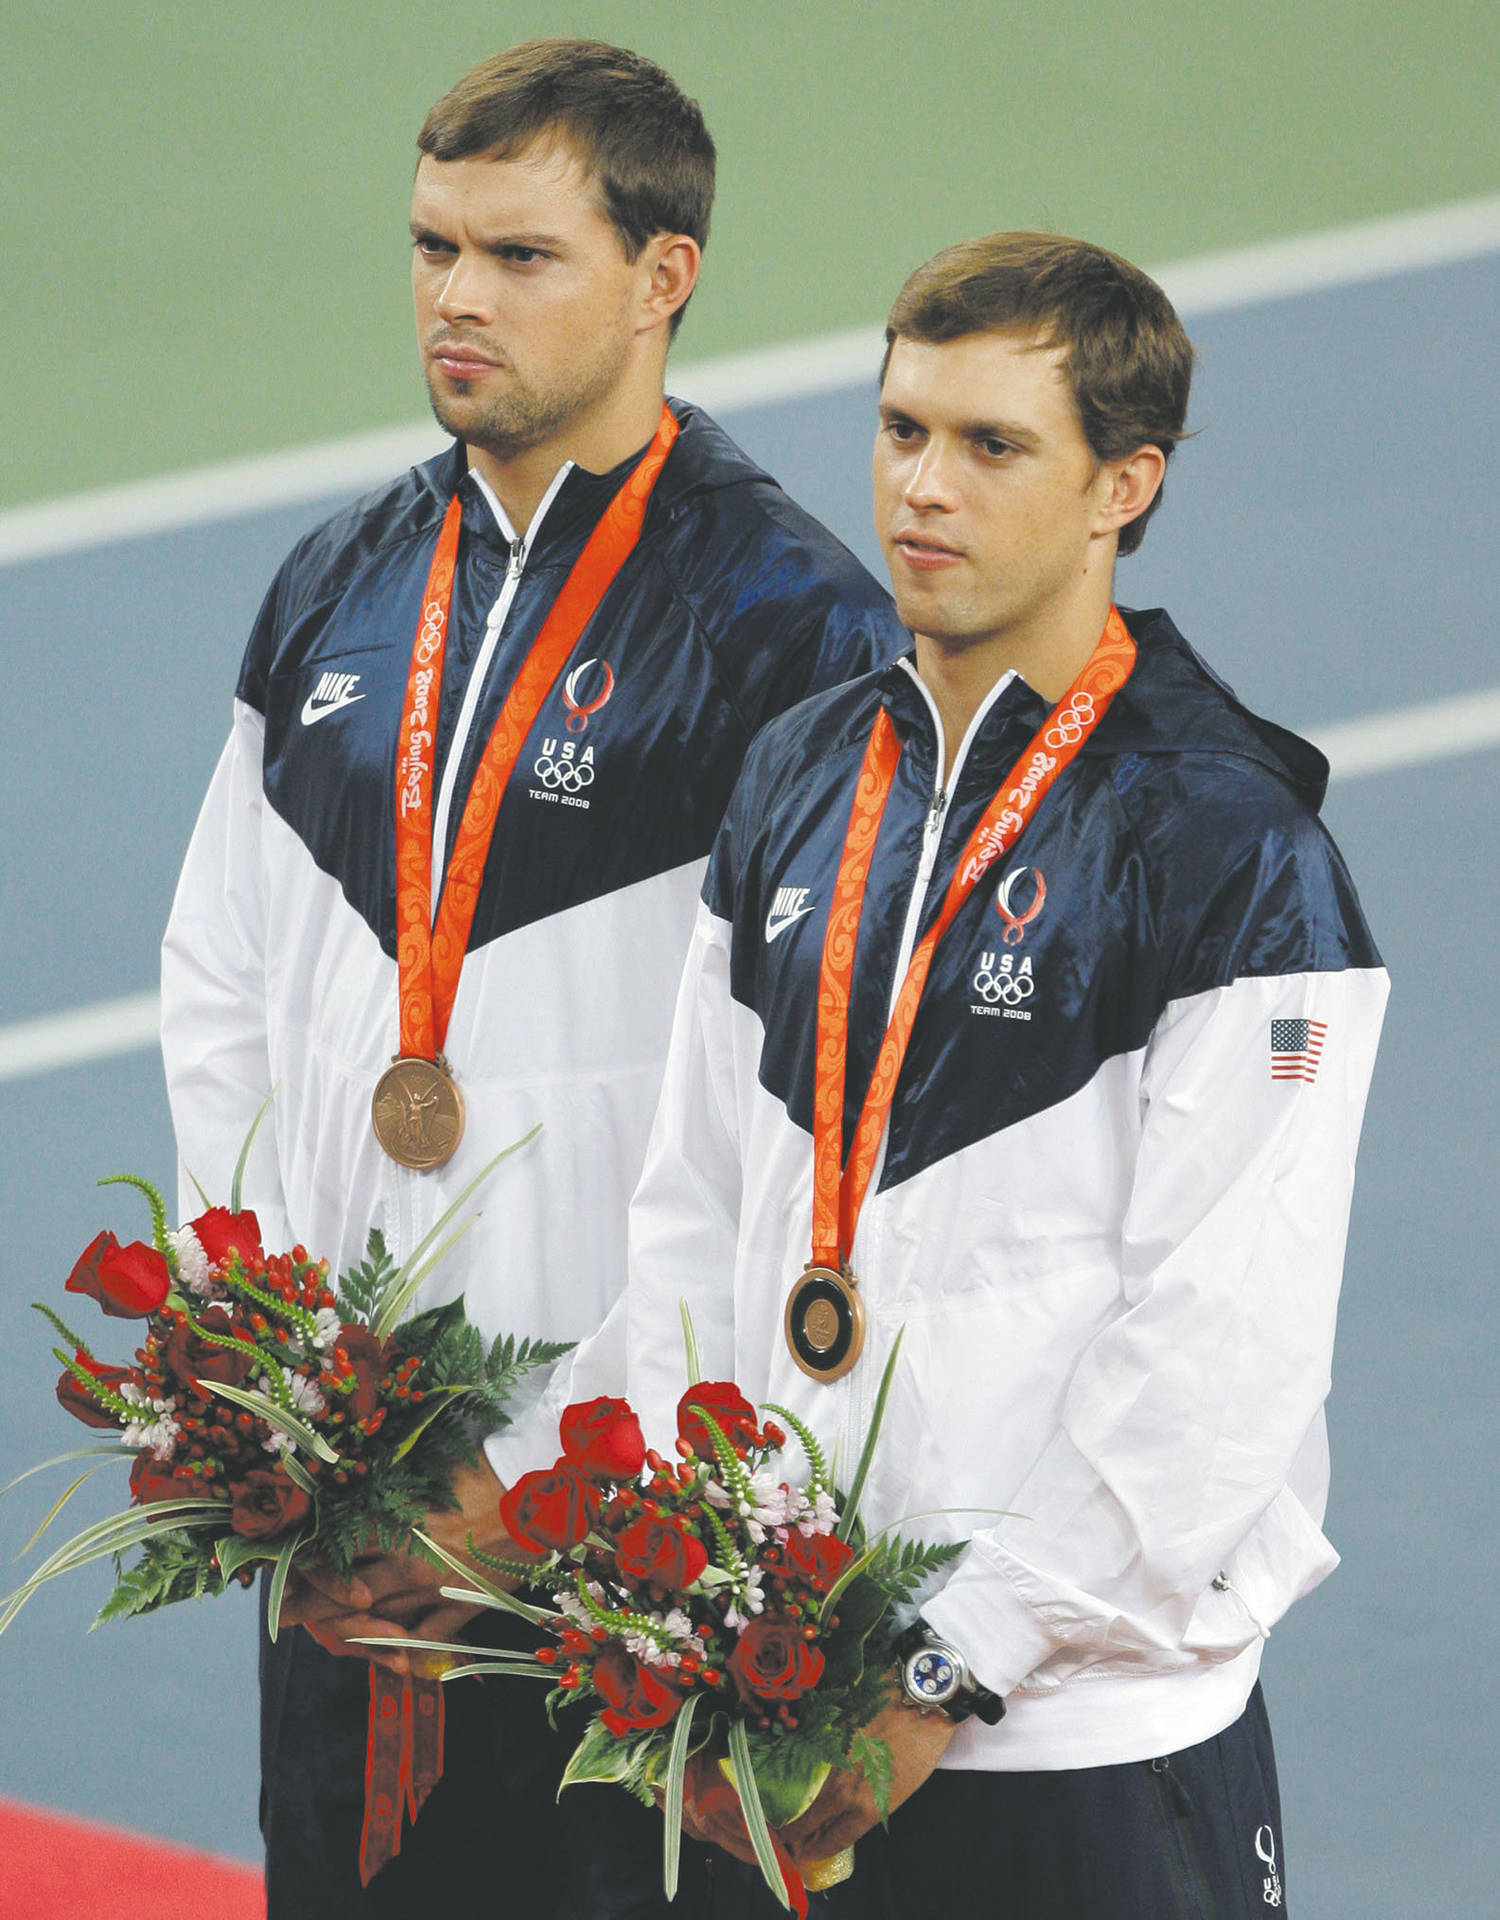 Bob Bryan And Mike With Medals Wallpaper